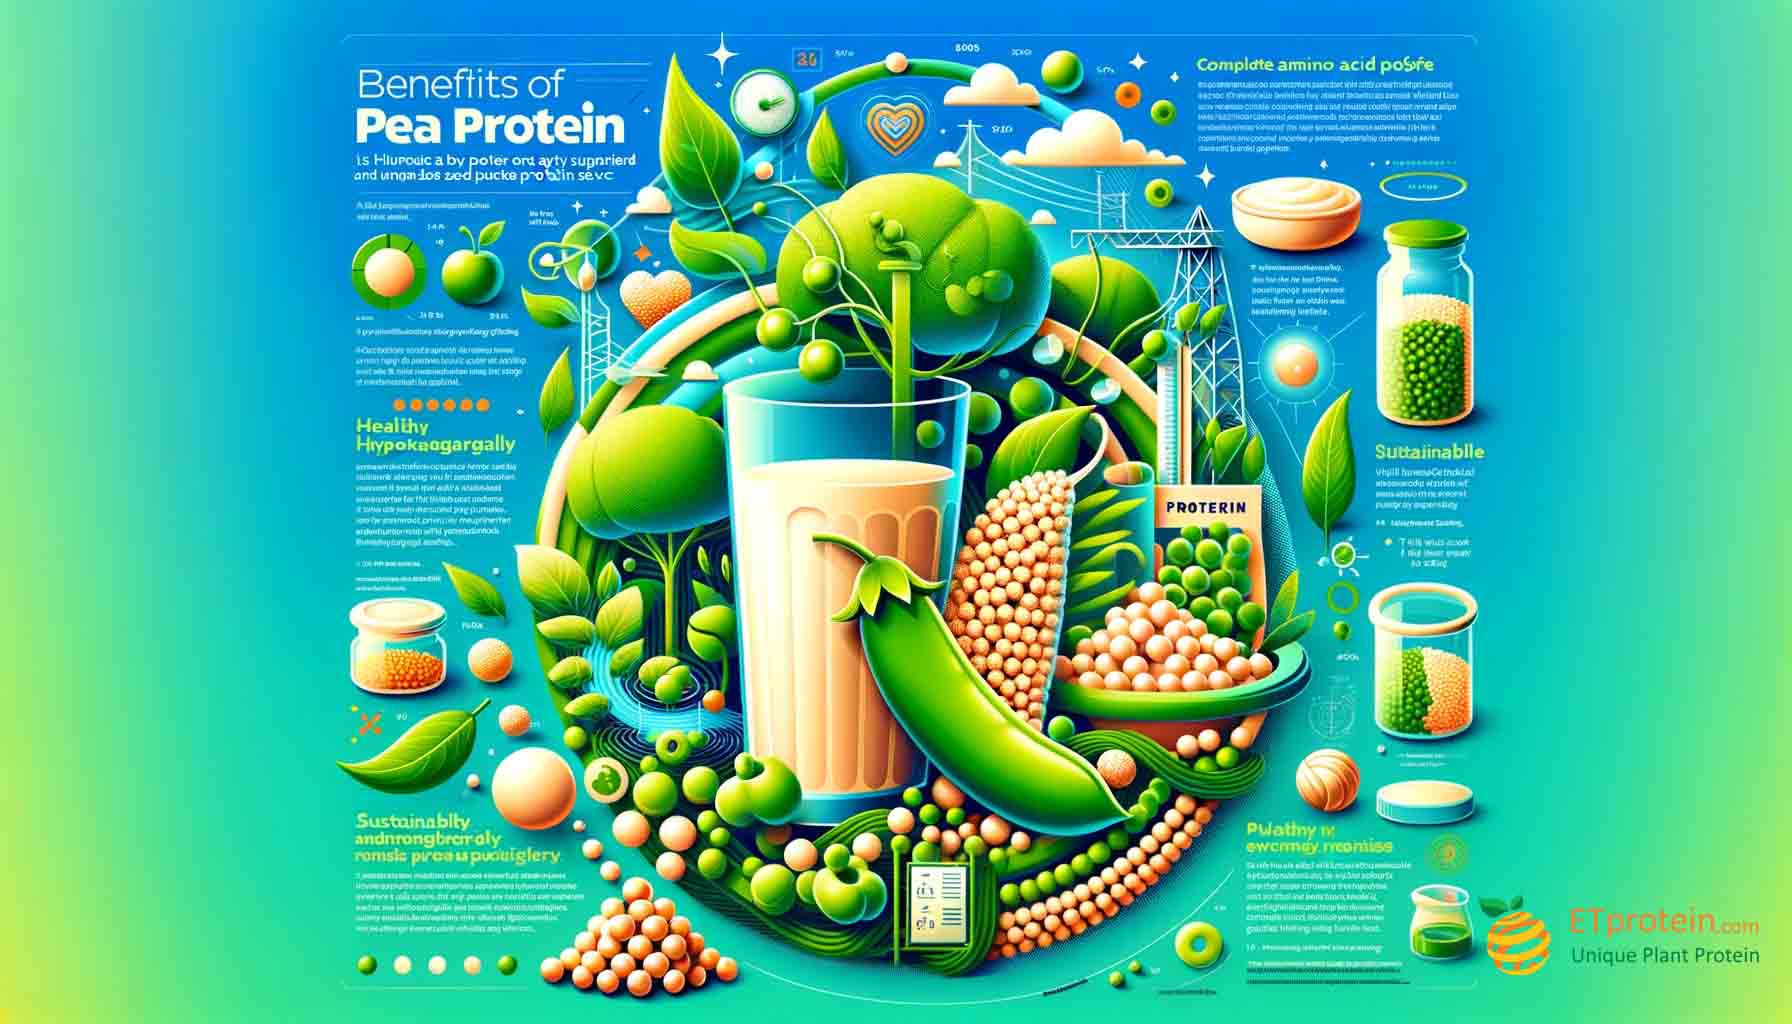 Is Pea Protein Soy? Unraveling the Myths and Facts.Uncover the truth about pea vs. soy protein and why ETprotein's high-quality, sustainable pea protein is the superior choice.